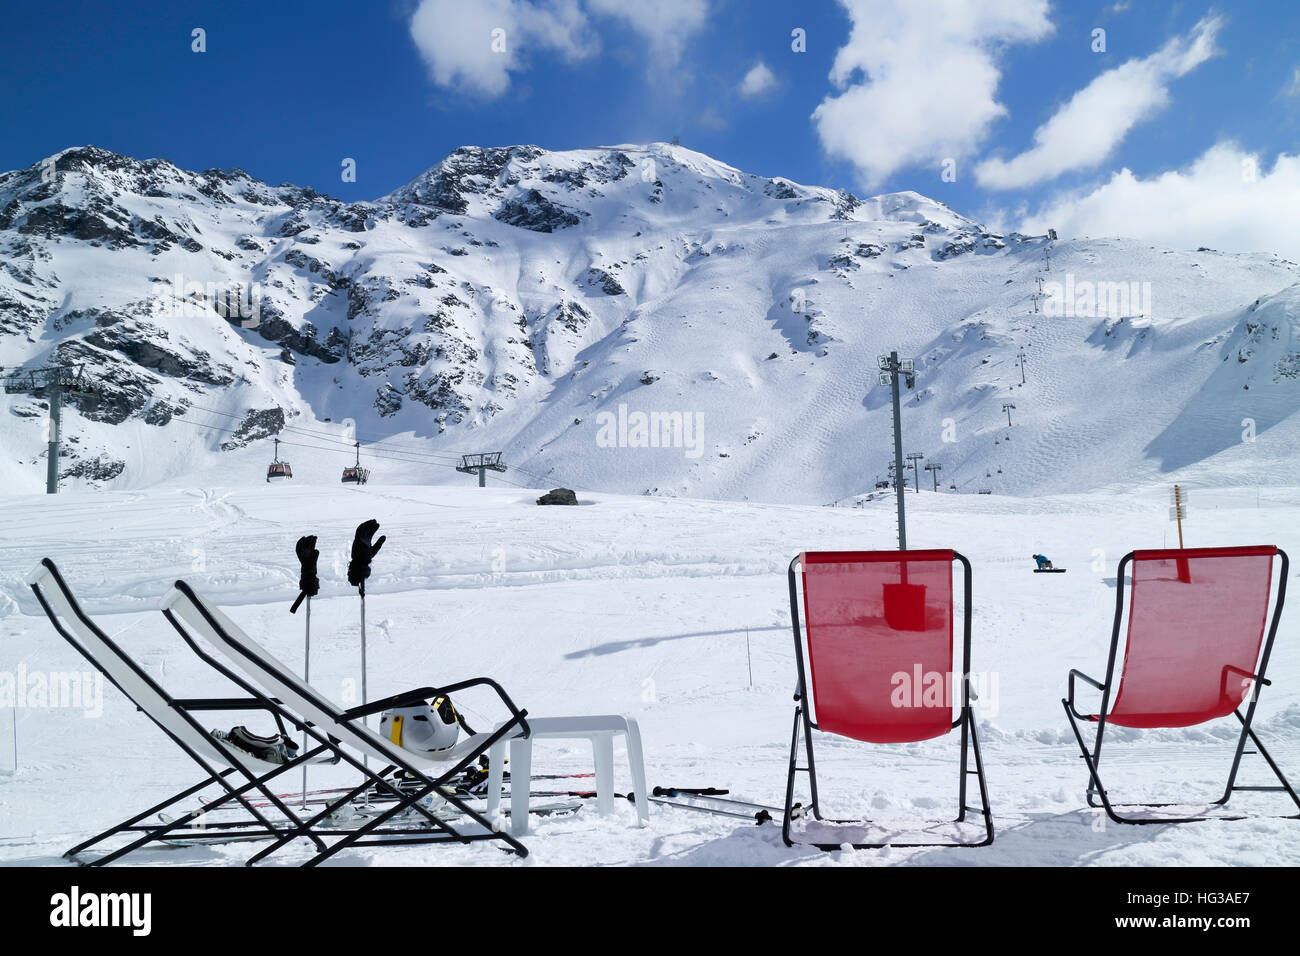 Red and white relaxing lounge chairs on snow in front of ski piste and lifts, in alpine winter resort of Les Arcs, France . Stock Photo